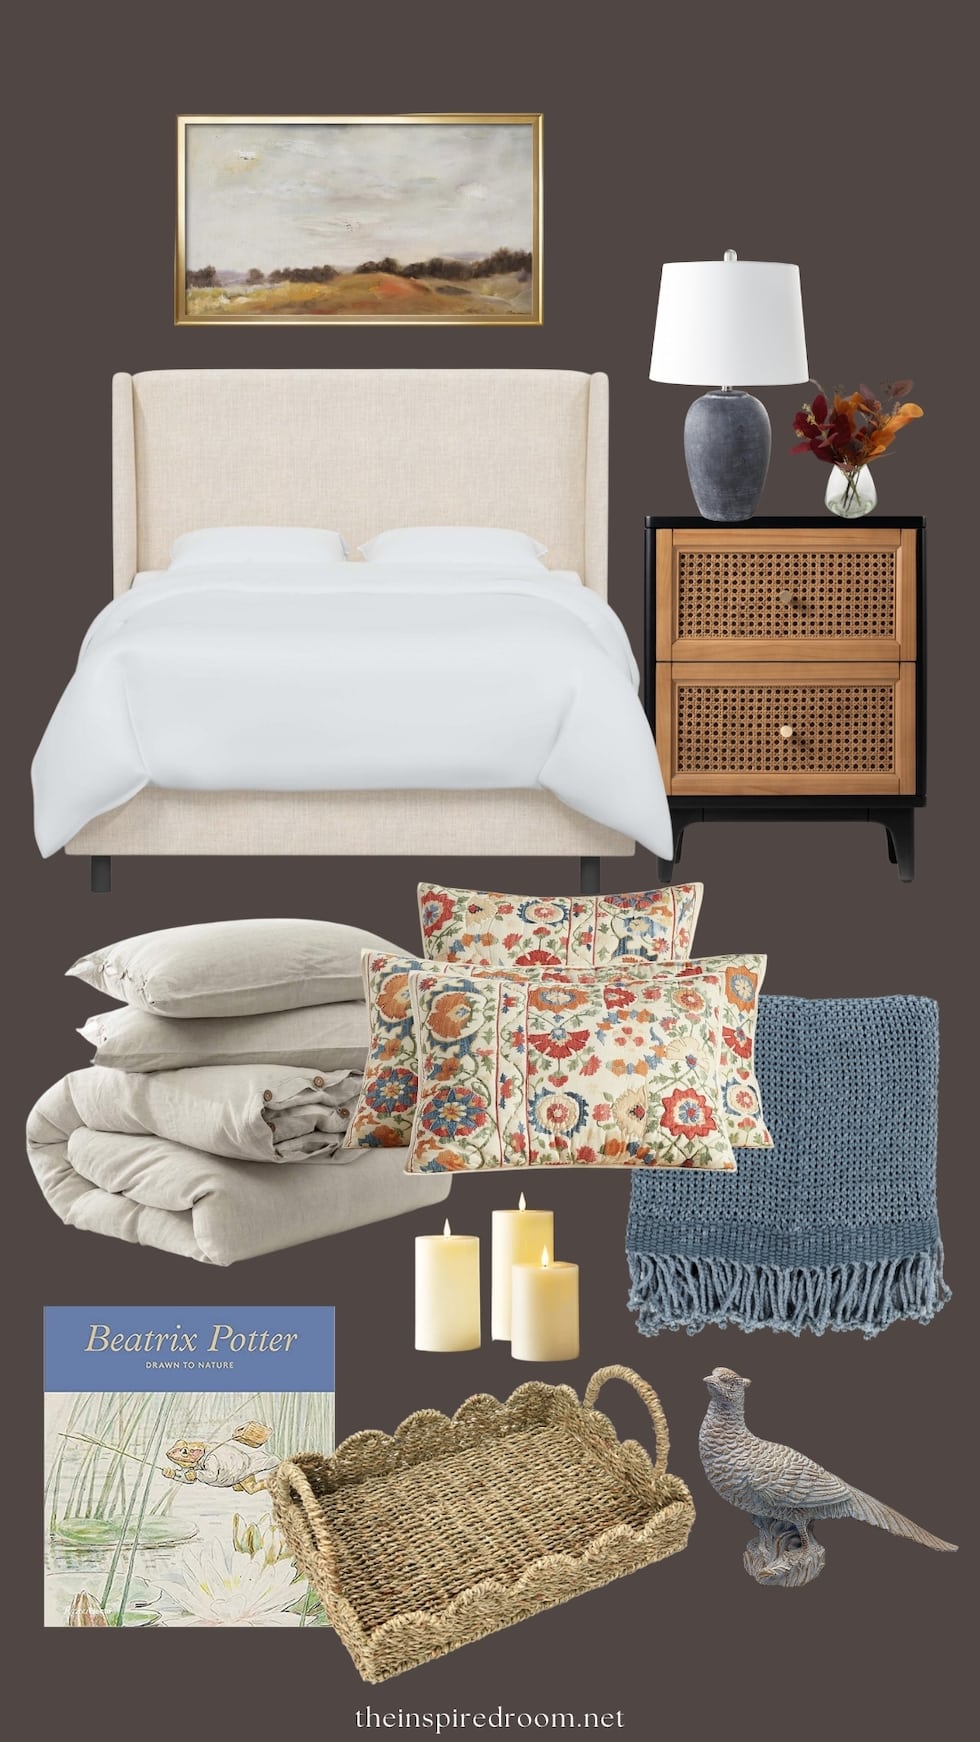 Ideas for a Cozy Fall Bedroom: Monday Mood Board